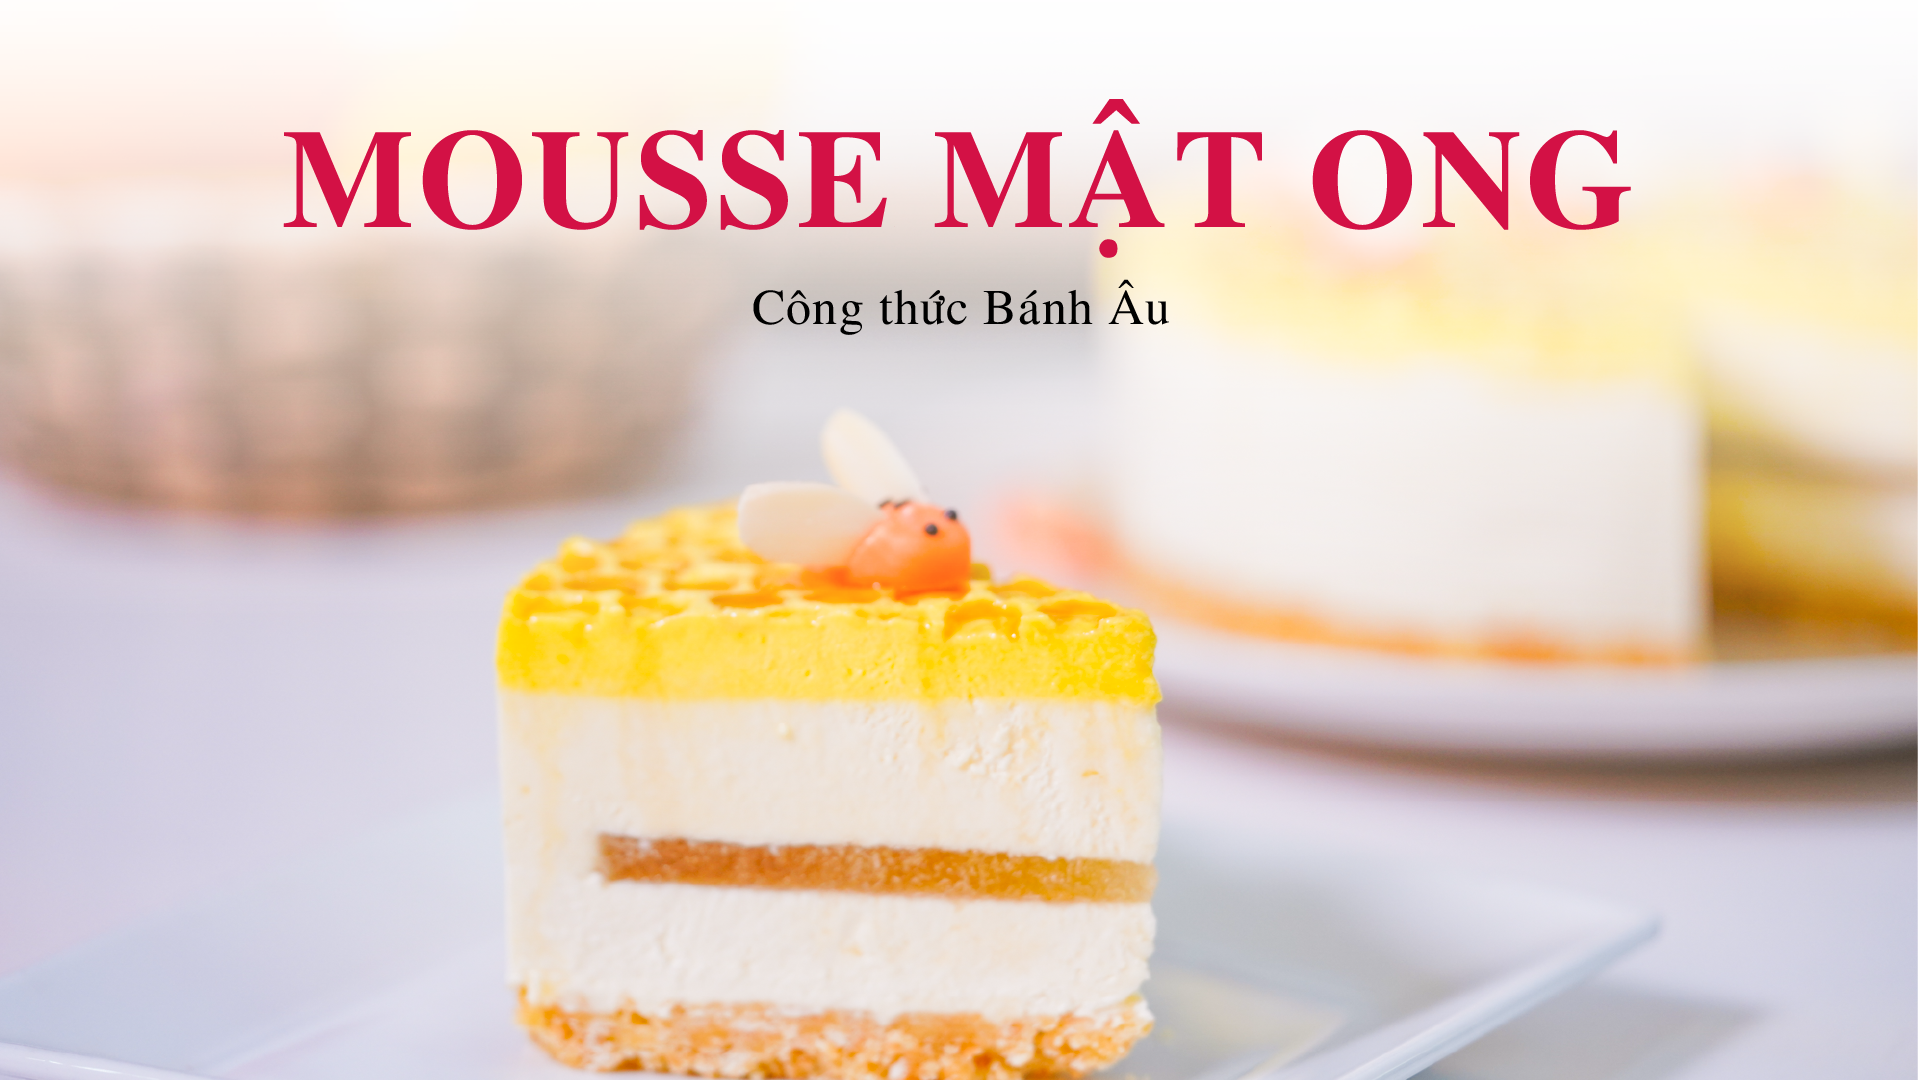 Mousse Mật Ong